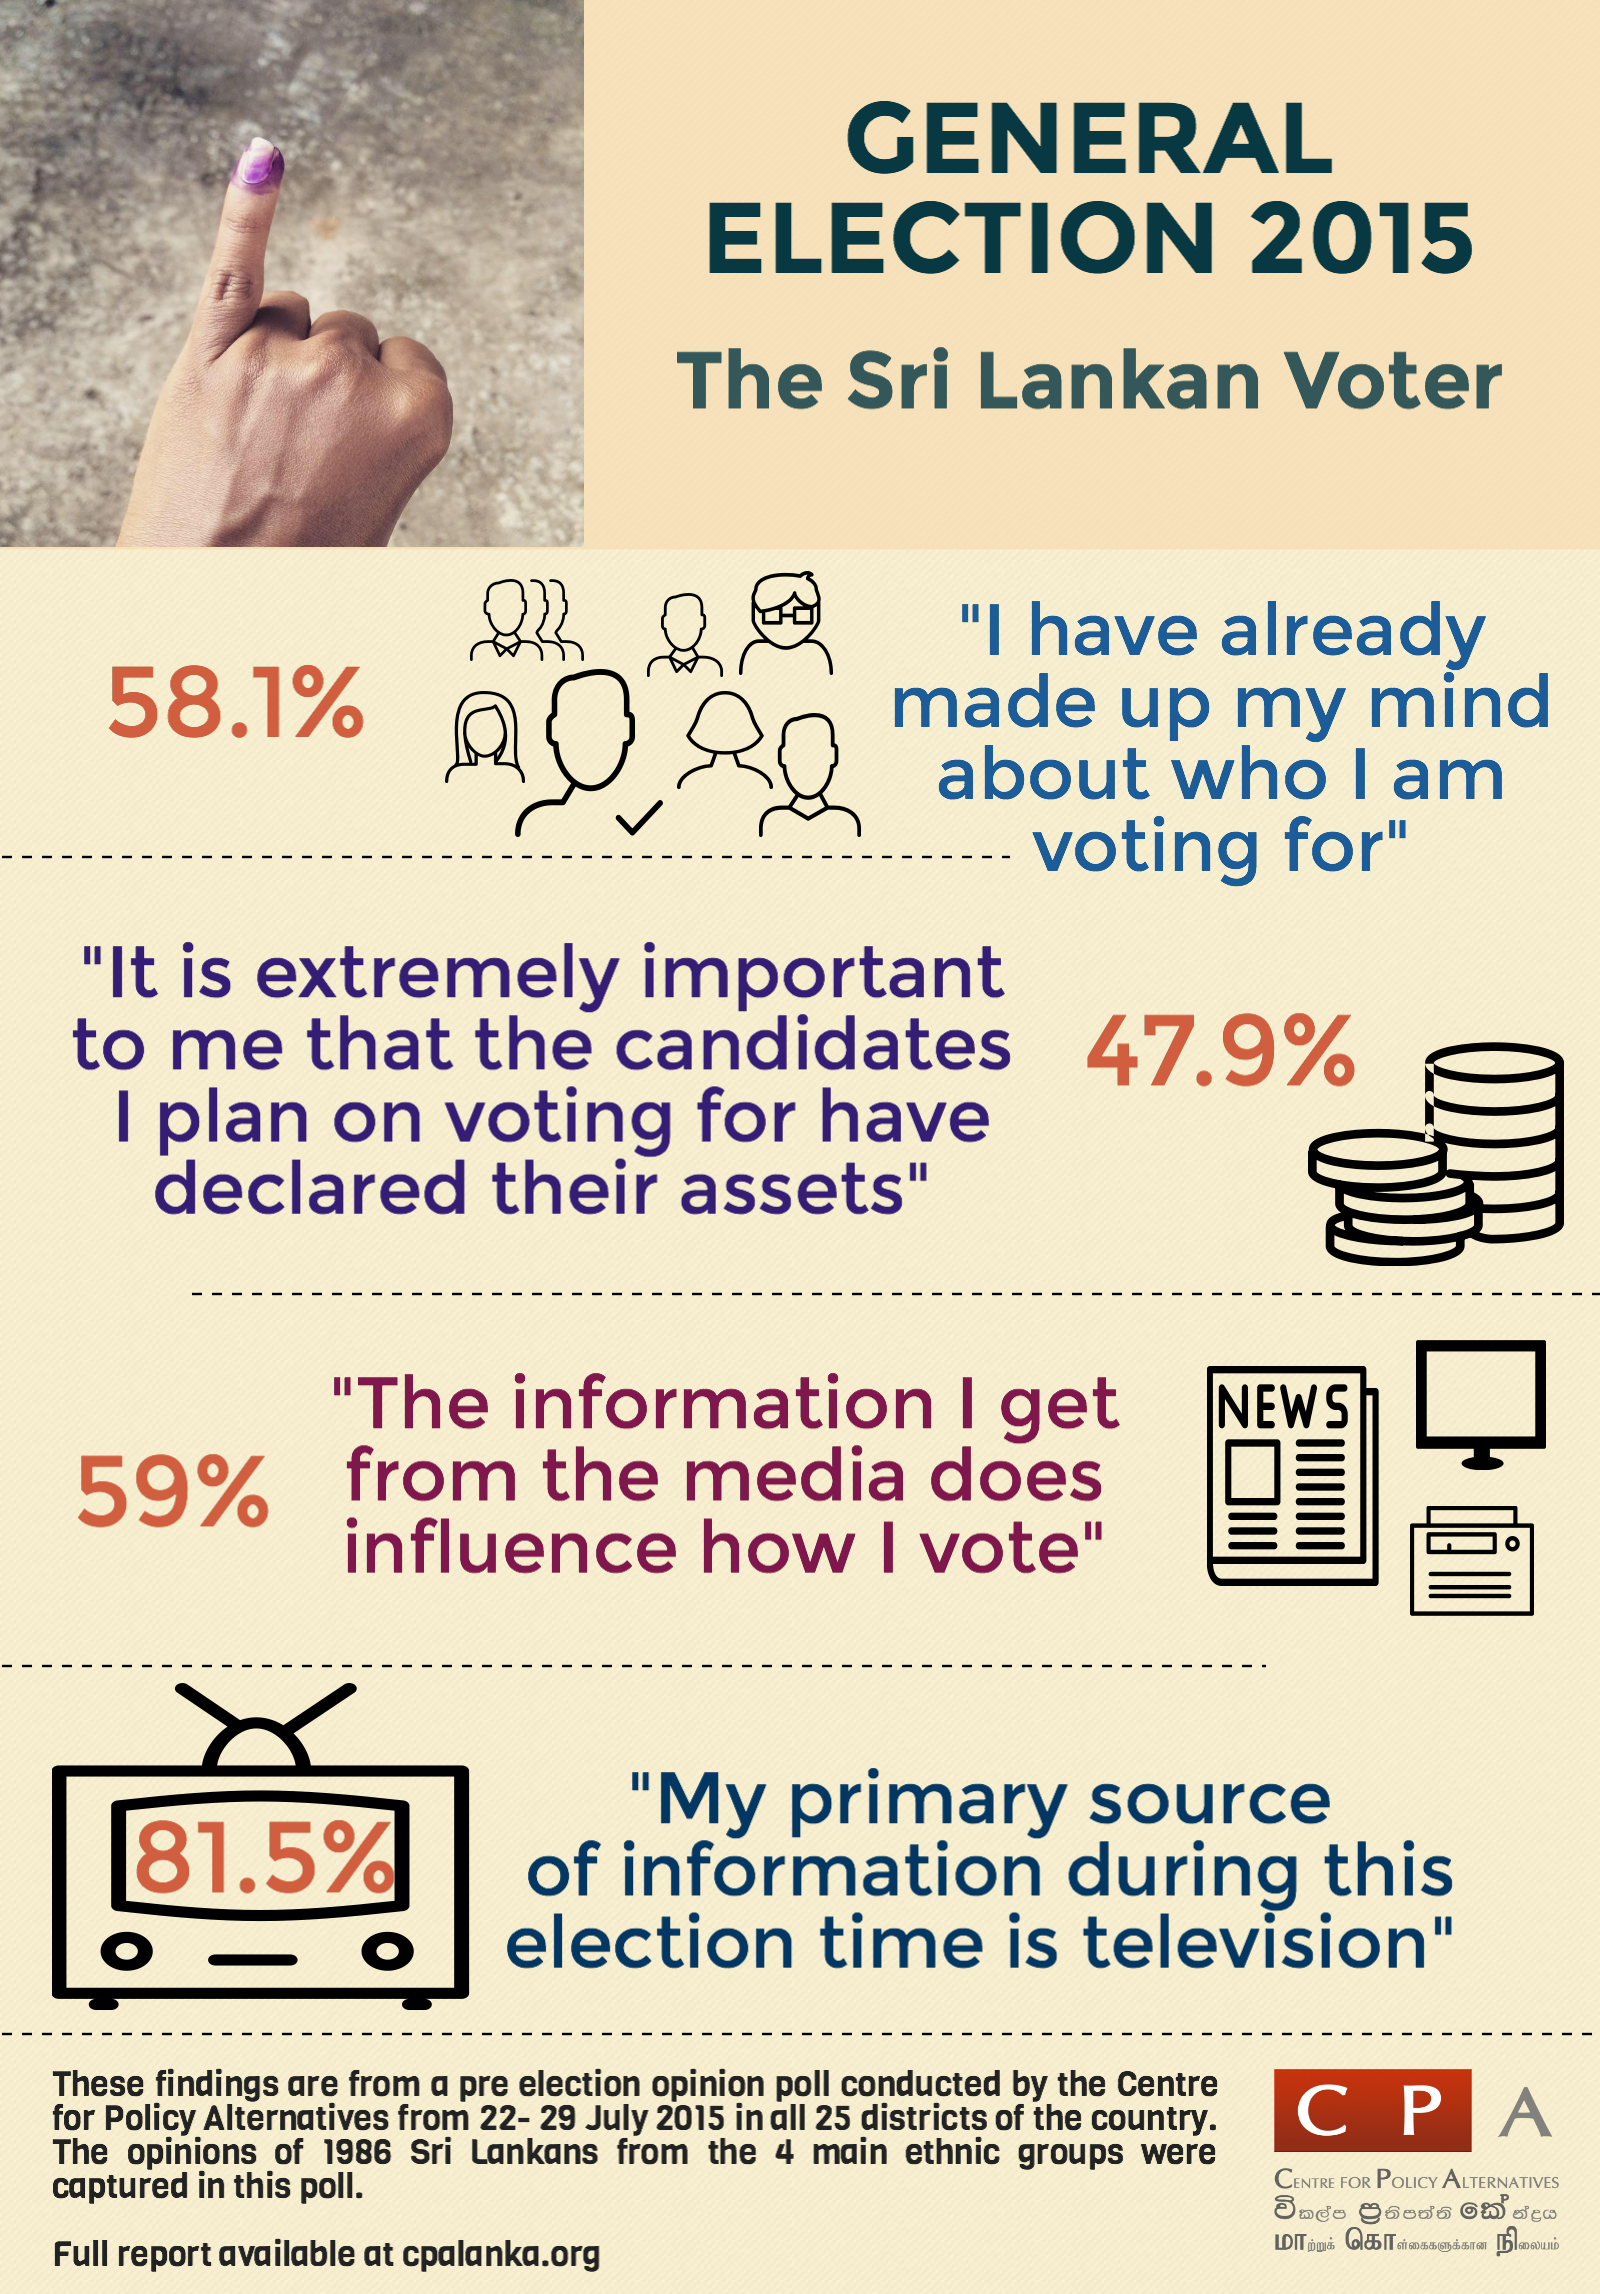 GE 2015 infographic 1_final